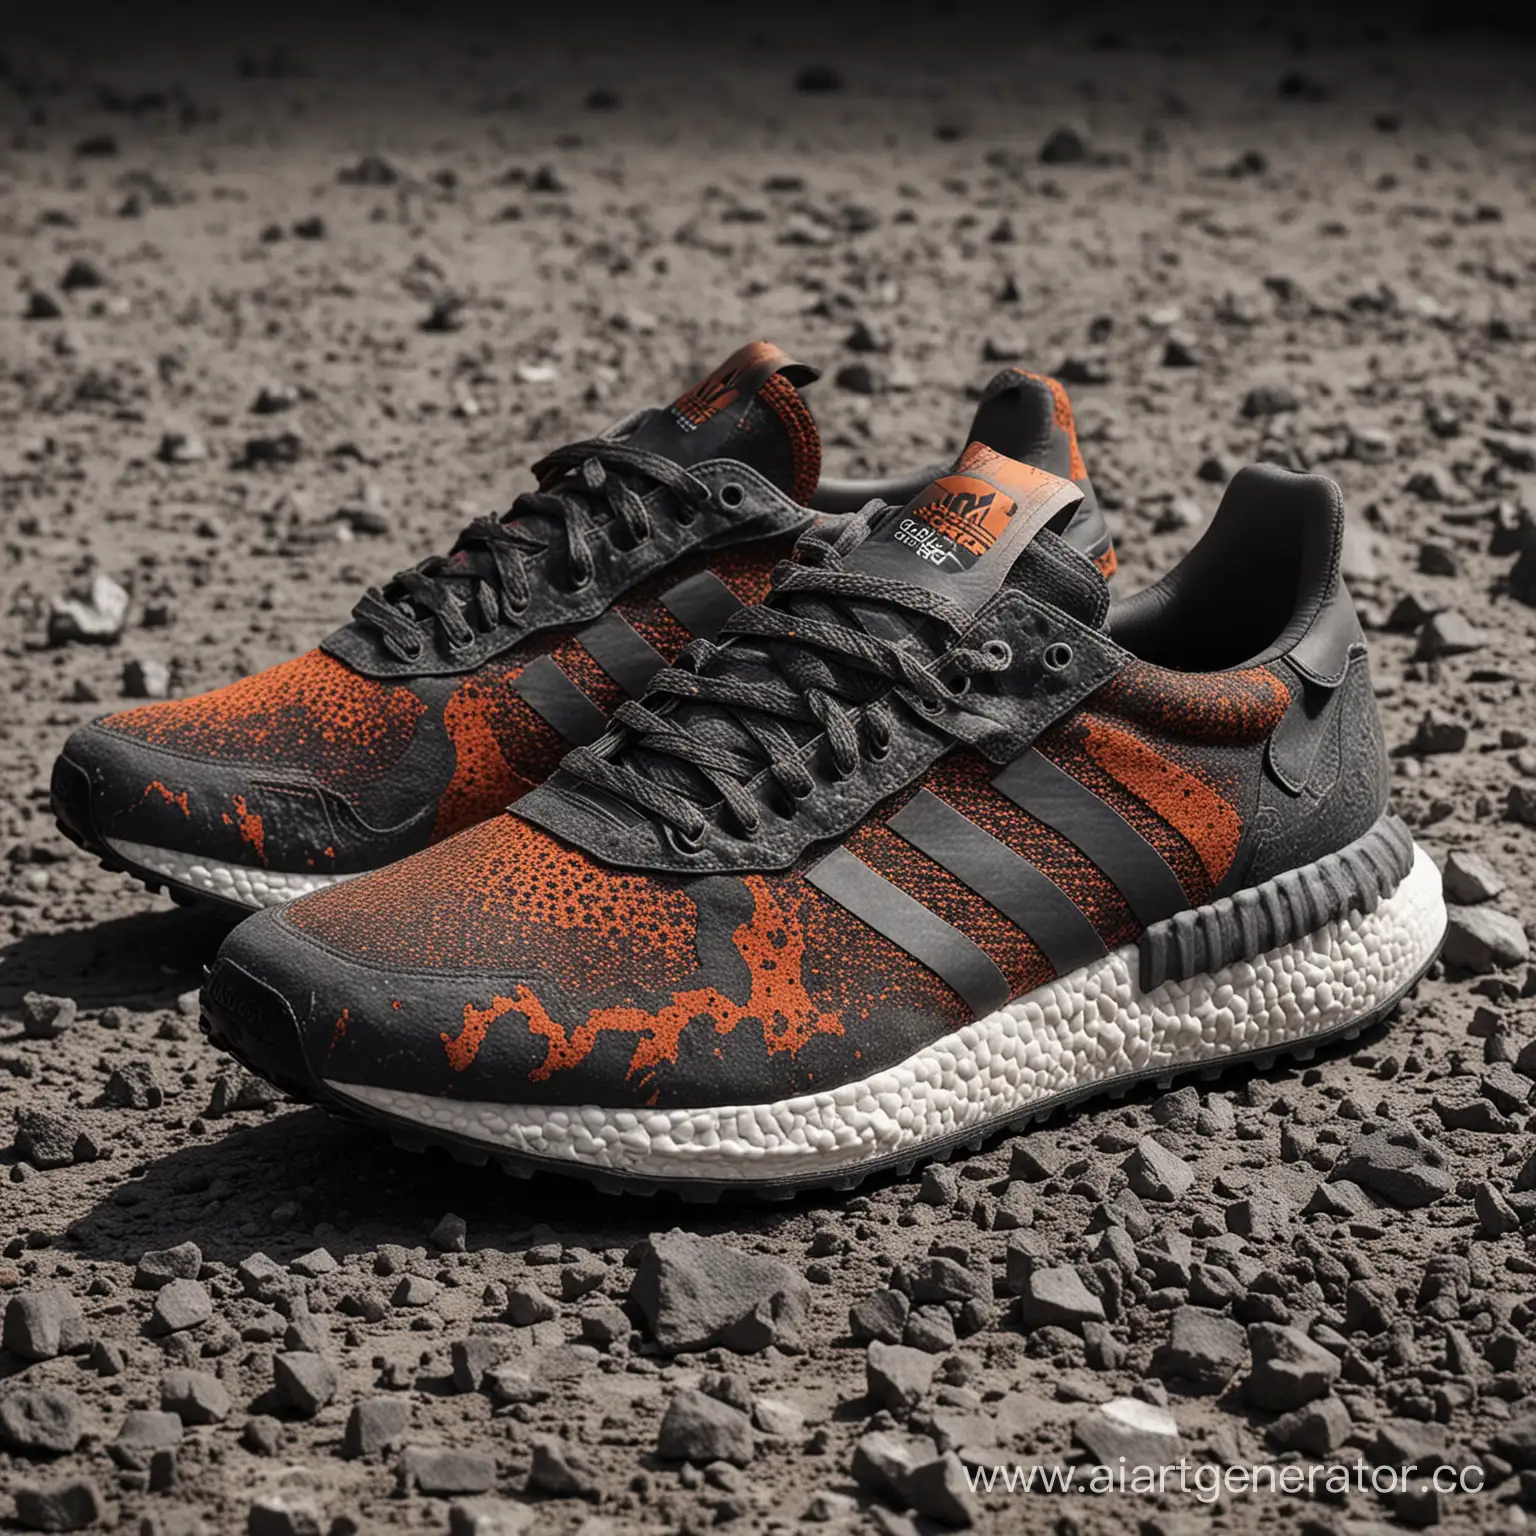 Adidas-Sneakers-with-Volcanic-Eruption-Texture-Stylish-Footwear-Inspired-by-Natures-Fury